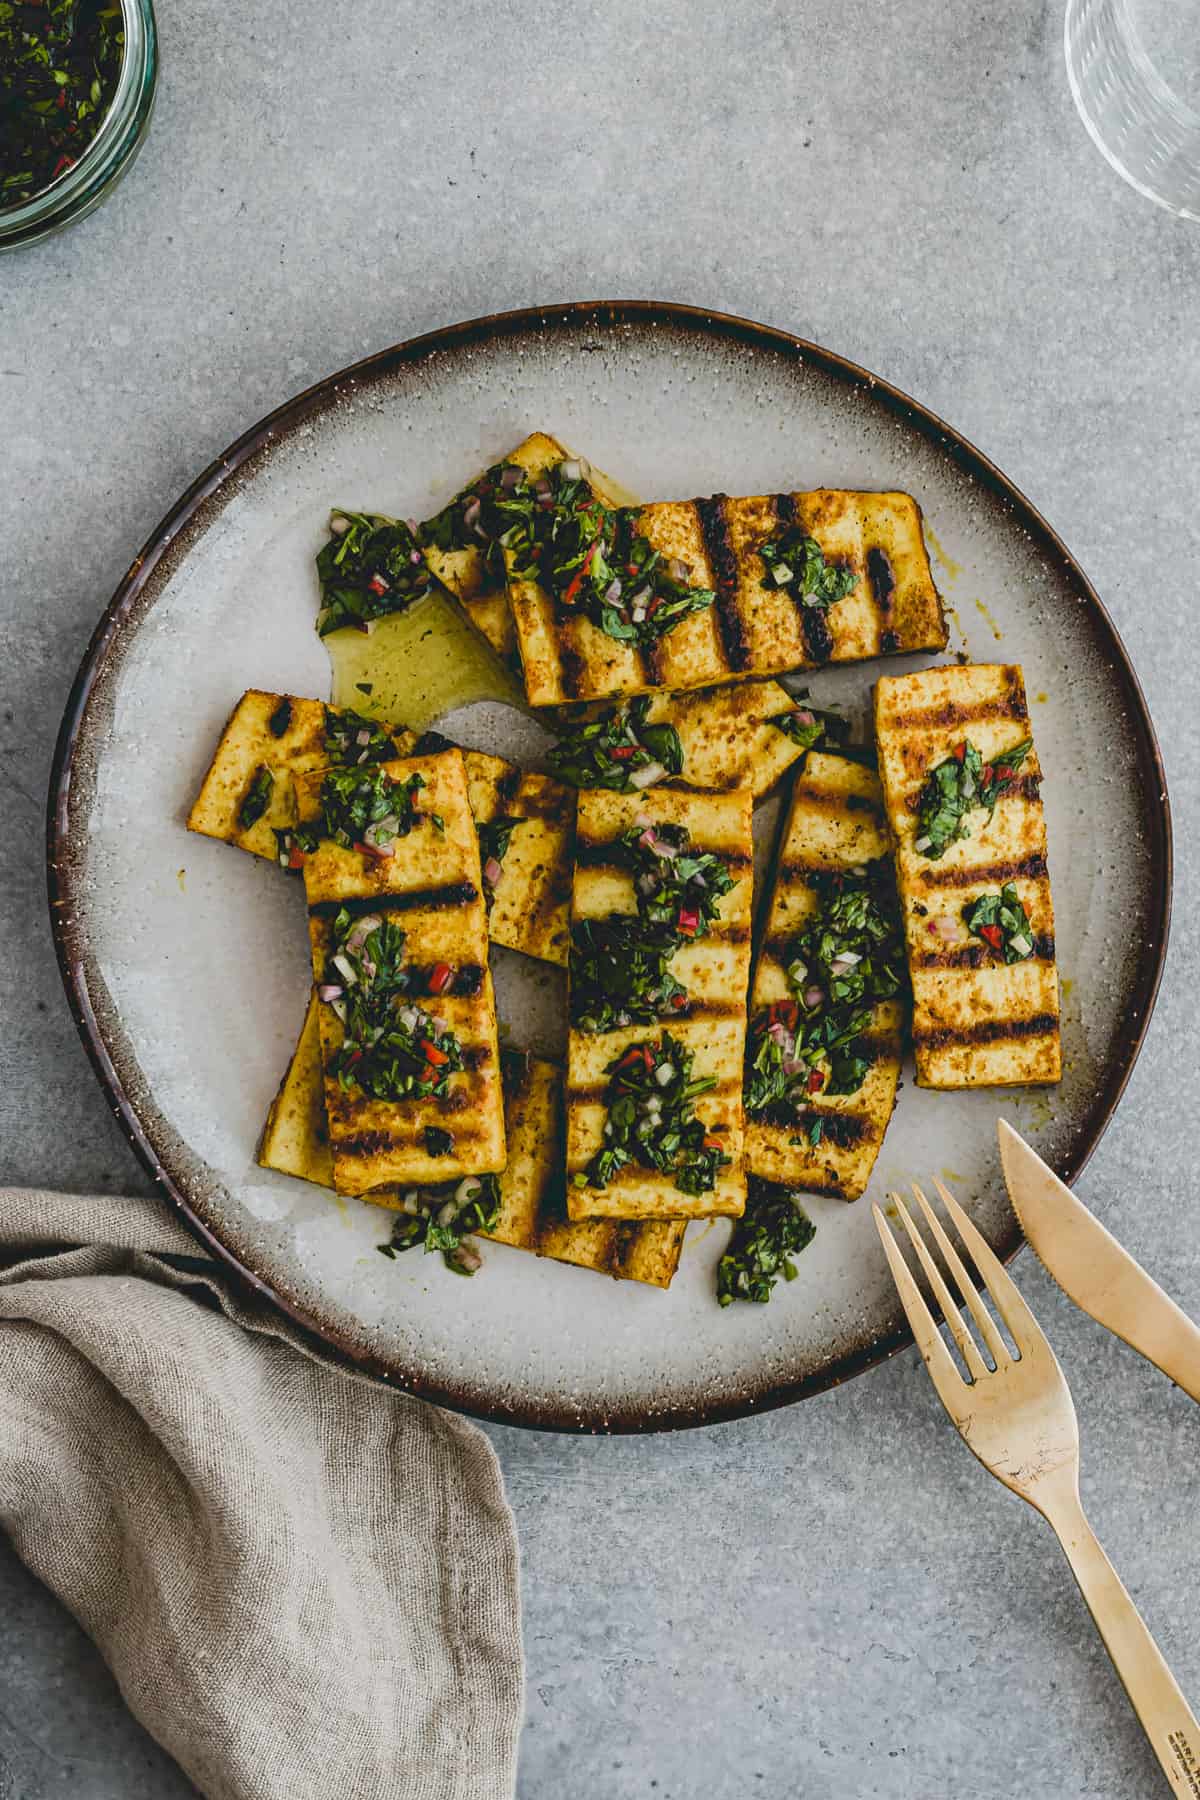 Top view of a plate with grilled tofu steaks topped with a homemade green and red chimichurri sauce!